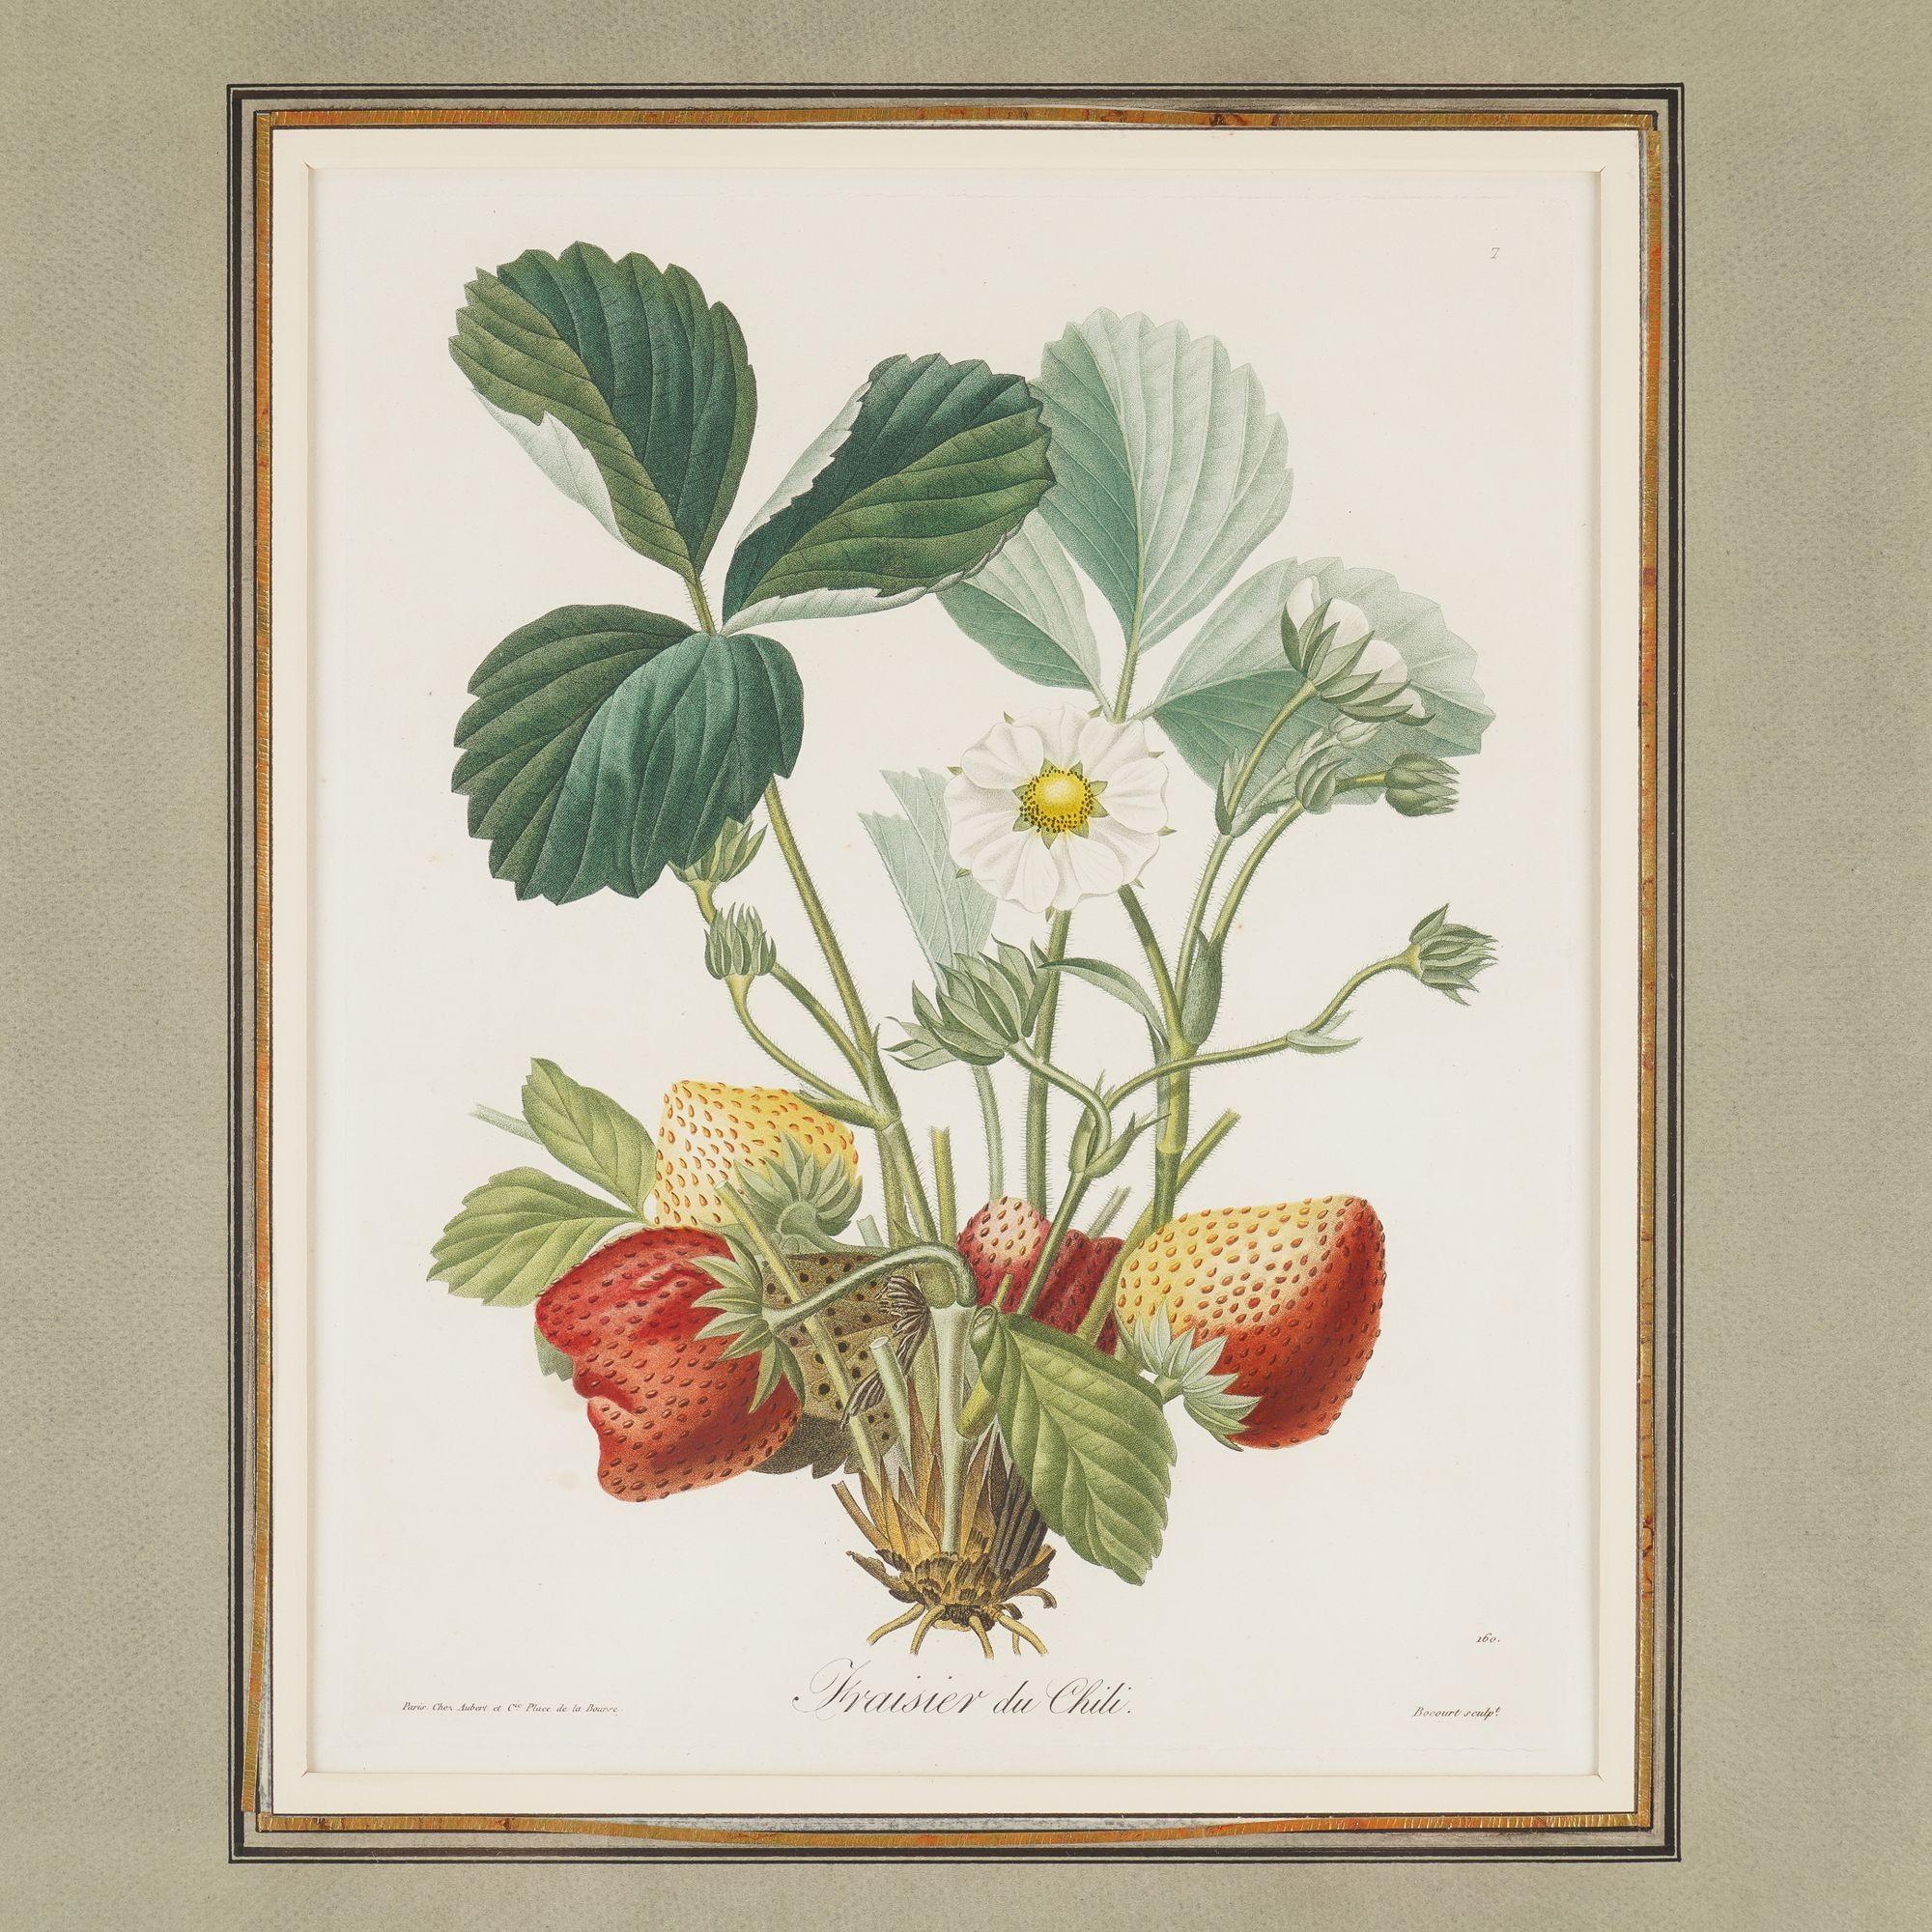 French Stippled engraving of a strawberry plant by Pierre-Joseph Redouté, 1810